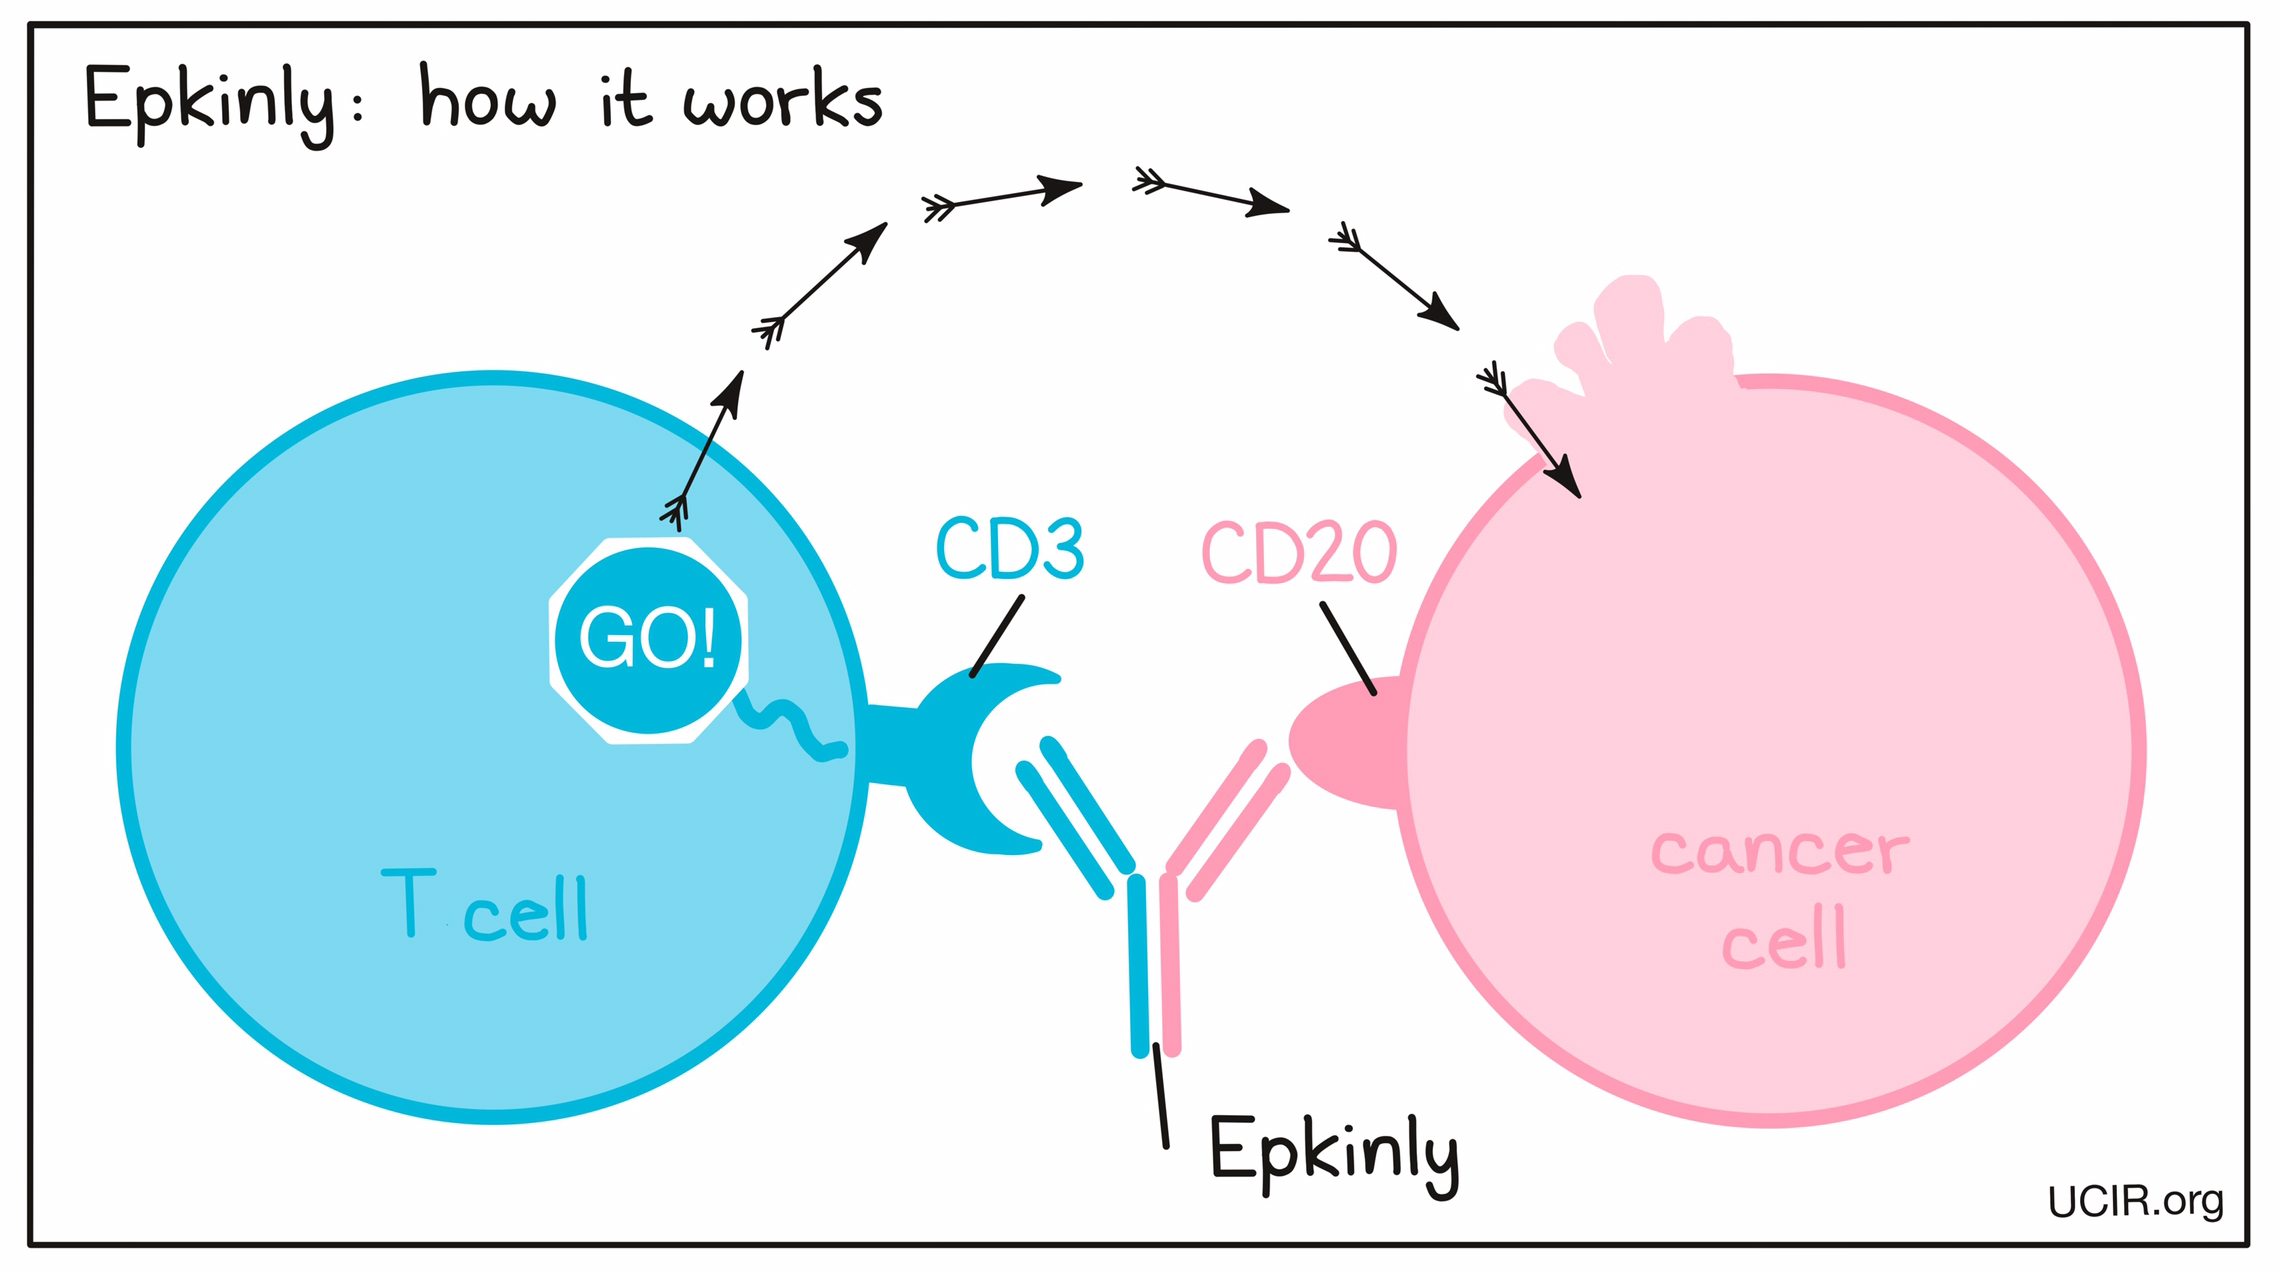 Illustration showing how Epkinly works